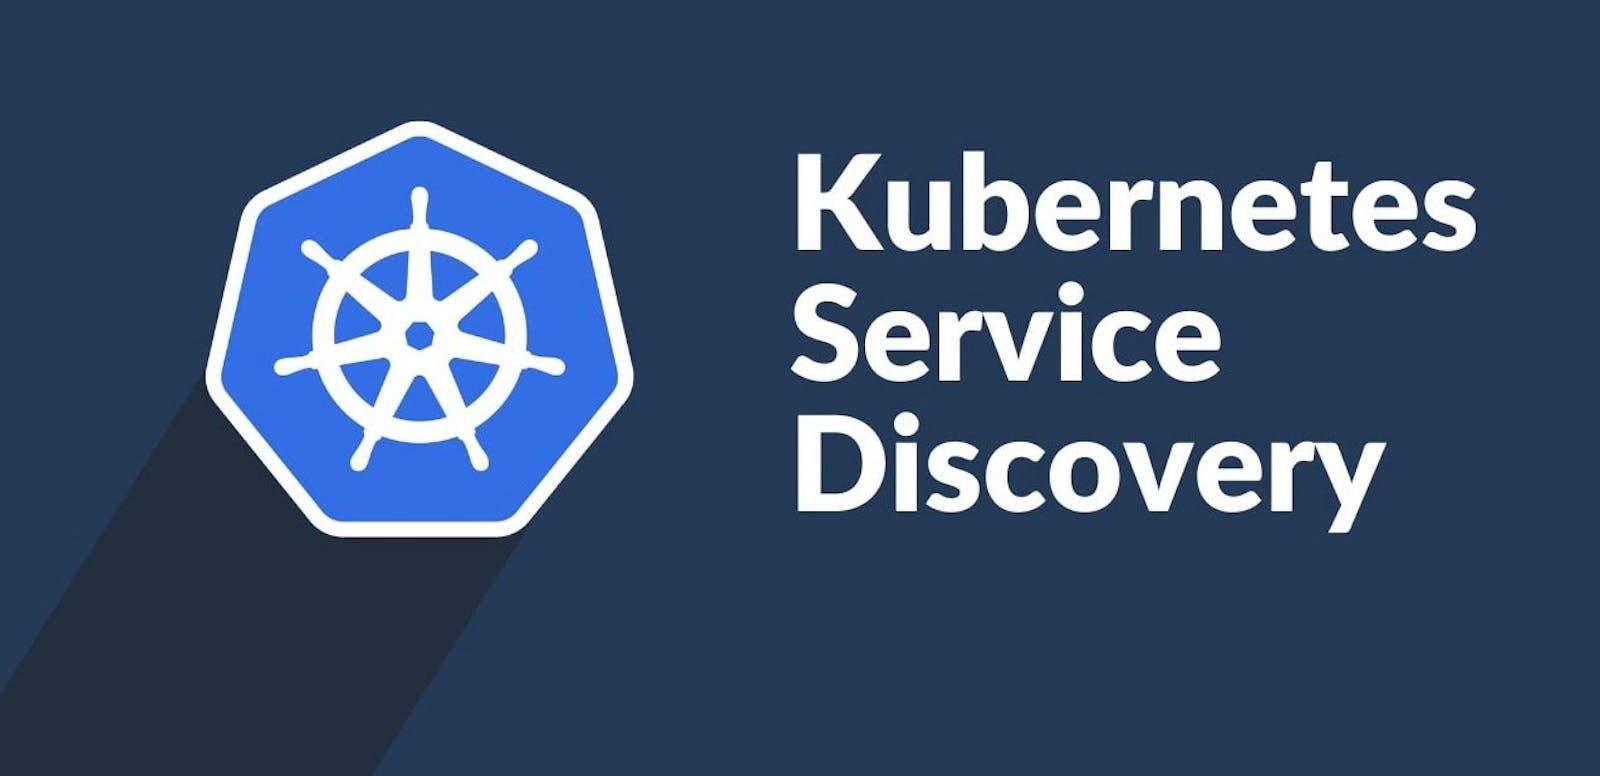 #KubeWeek Challenge Day-4
Kubernetes Services and Service Discovery